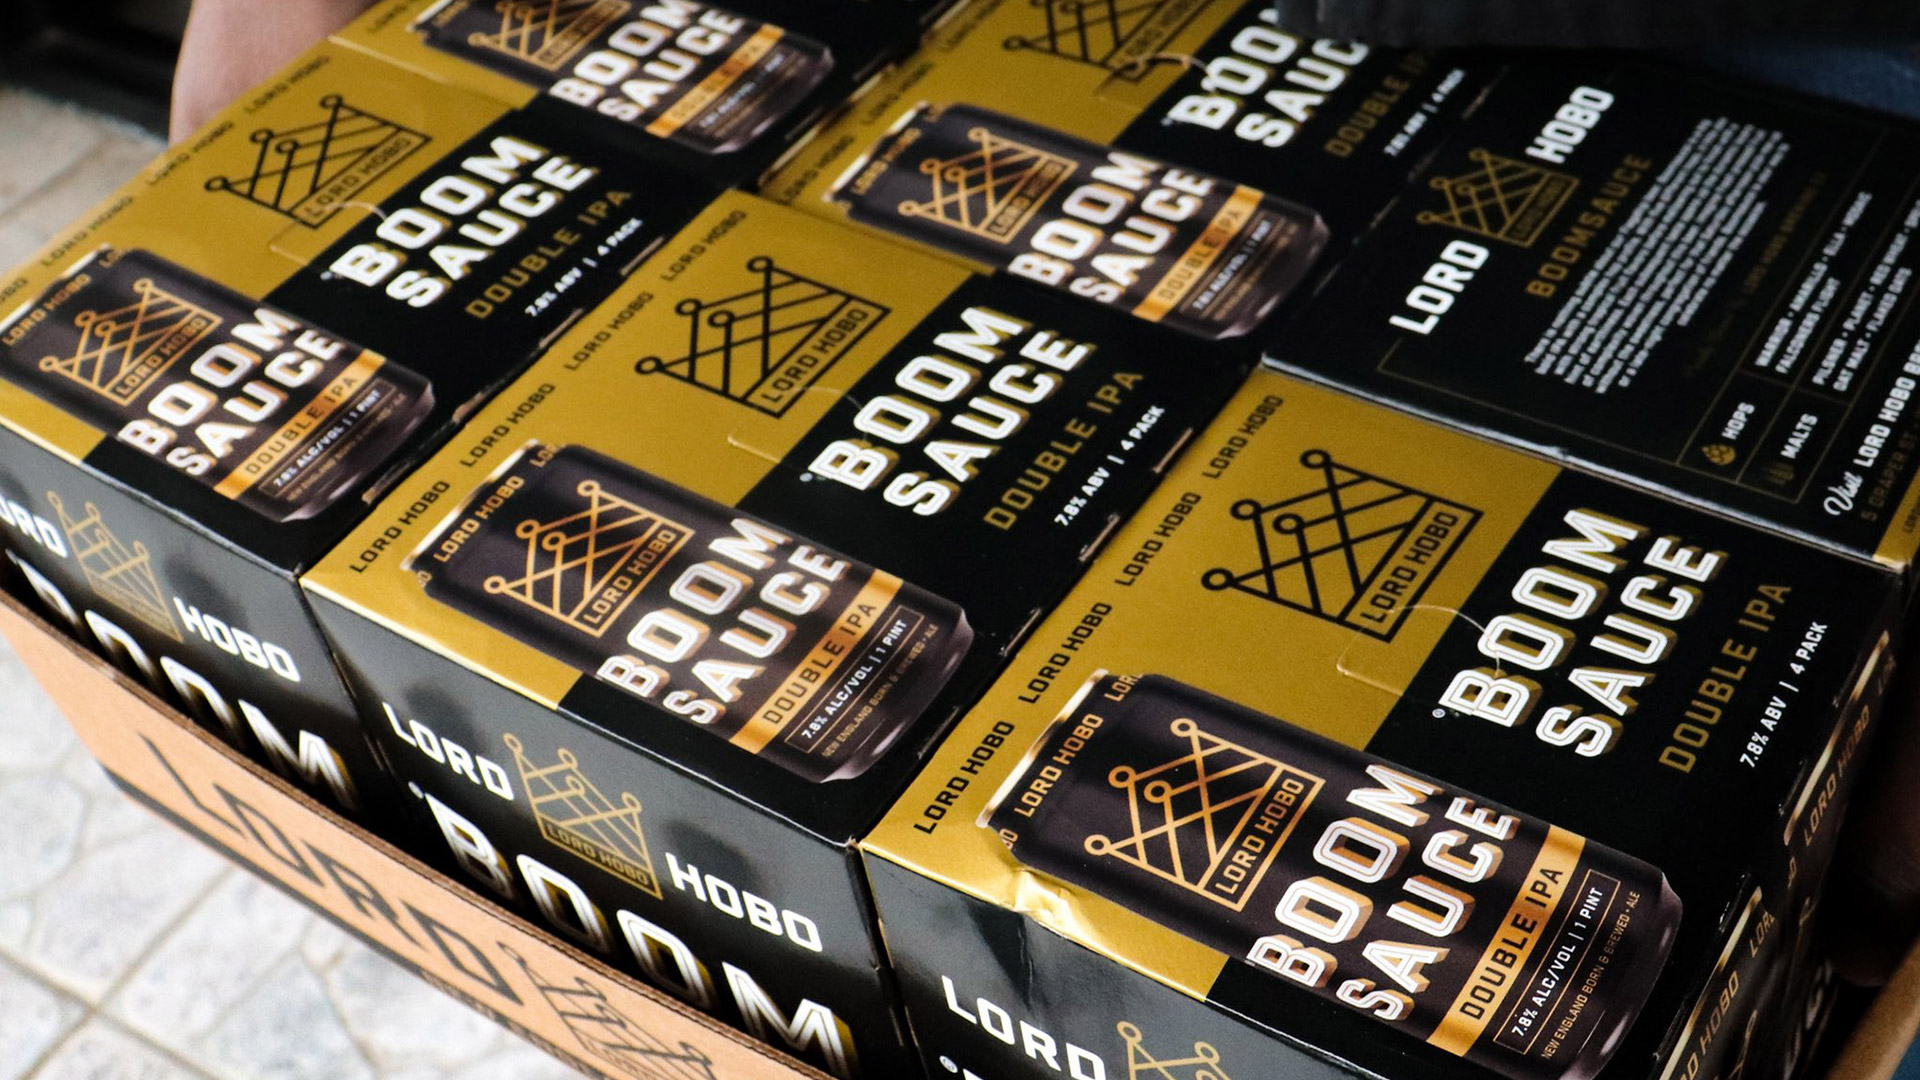 Lord Hobo Brewing Boomsauce Package Design - Unsung Studio Branding